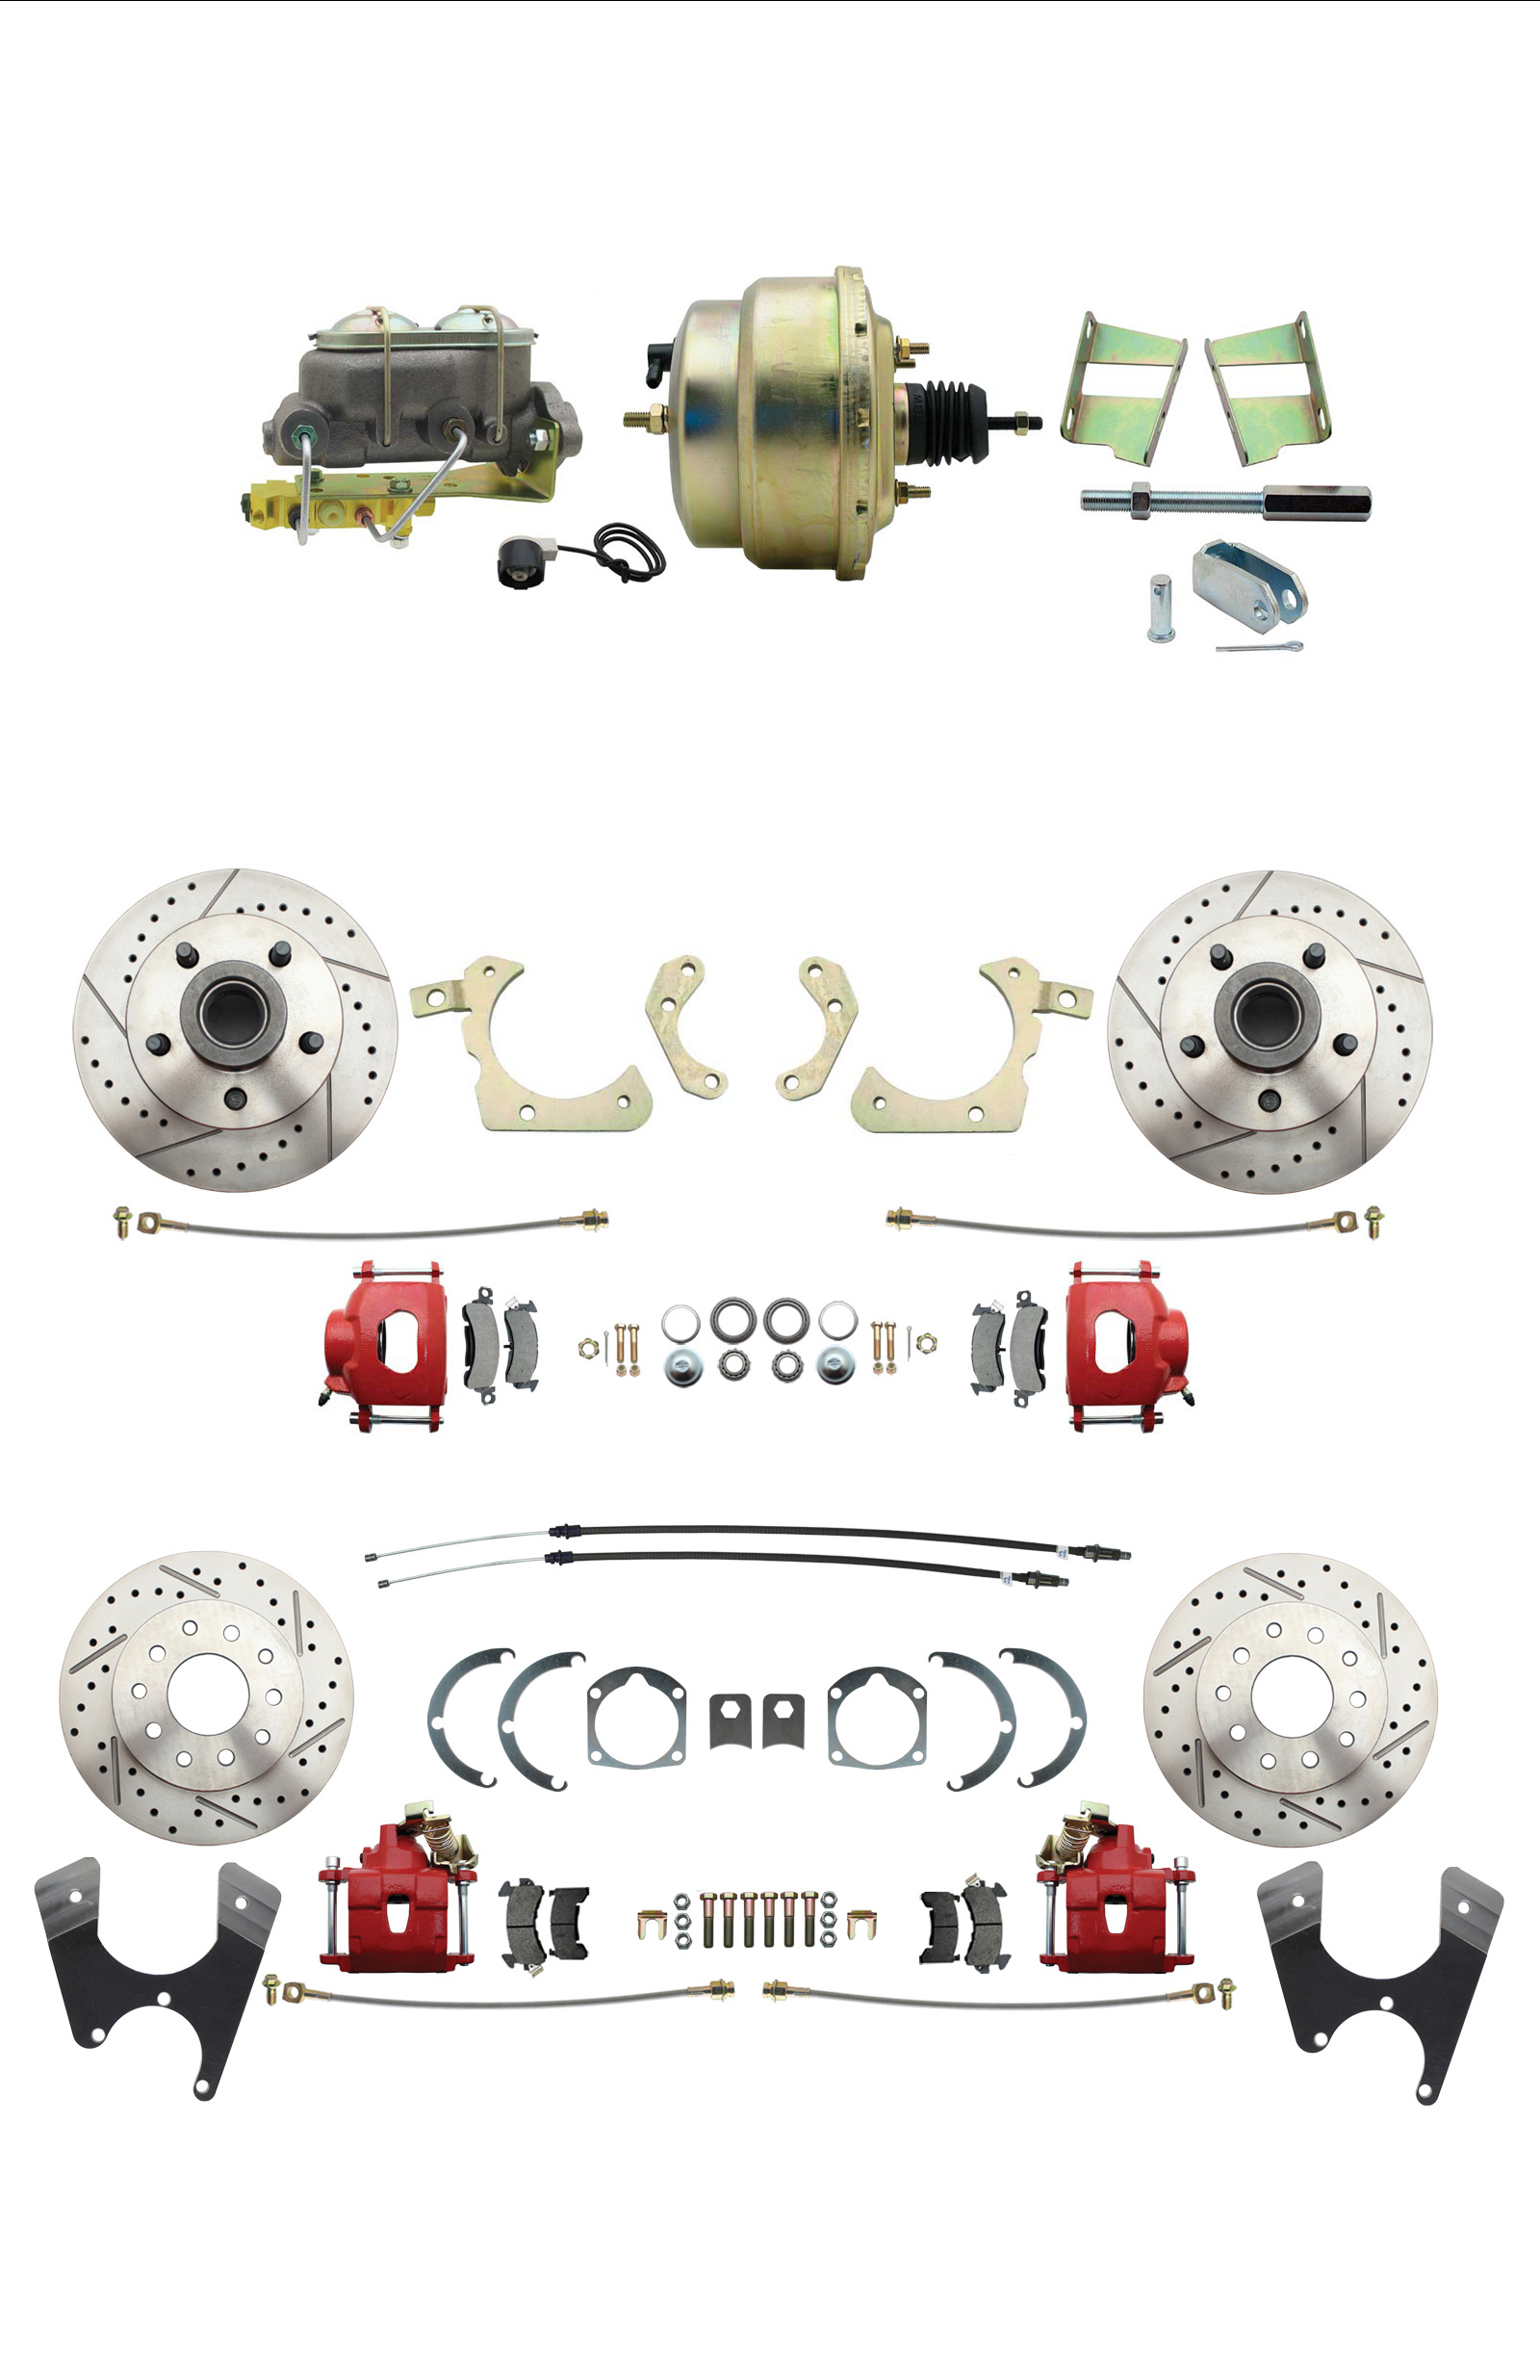 1959-1964 GM Full Size Front & Rear Power Disc Brake Kit Red Powder Coated Calipers Drilled/Slotted Rotors (Impala, Bel Air, Biscayne) & 8 Dual Zinc Booster Conversion Kit W/ Cast Iron Master Cylinder Bottom Mount Disc/